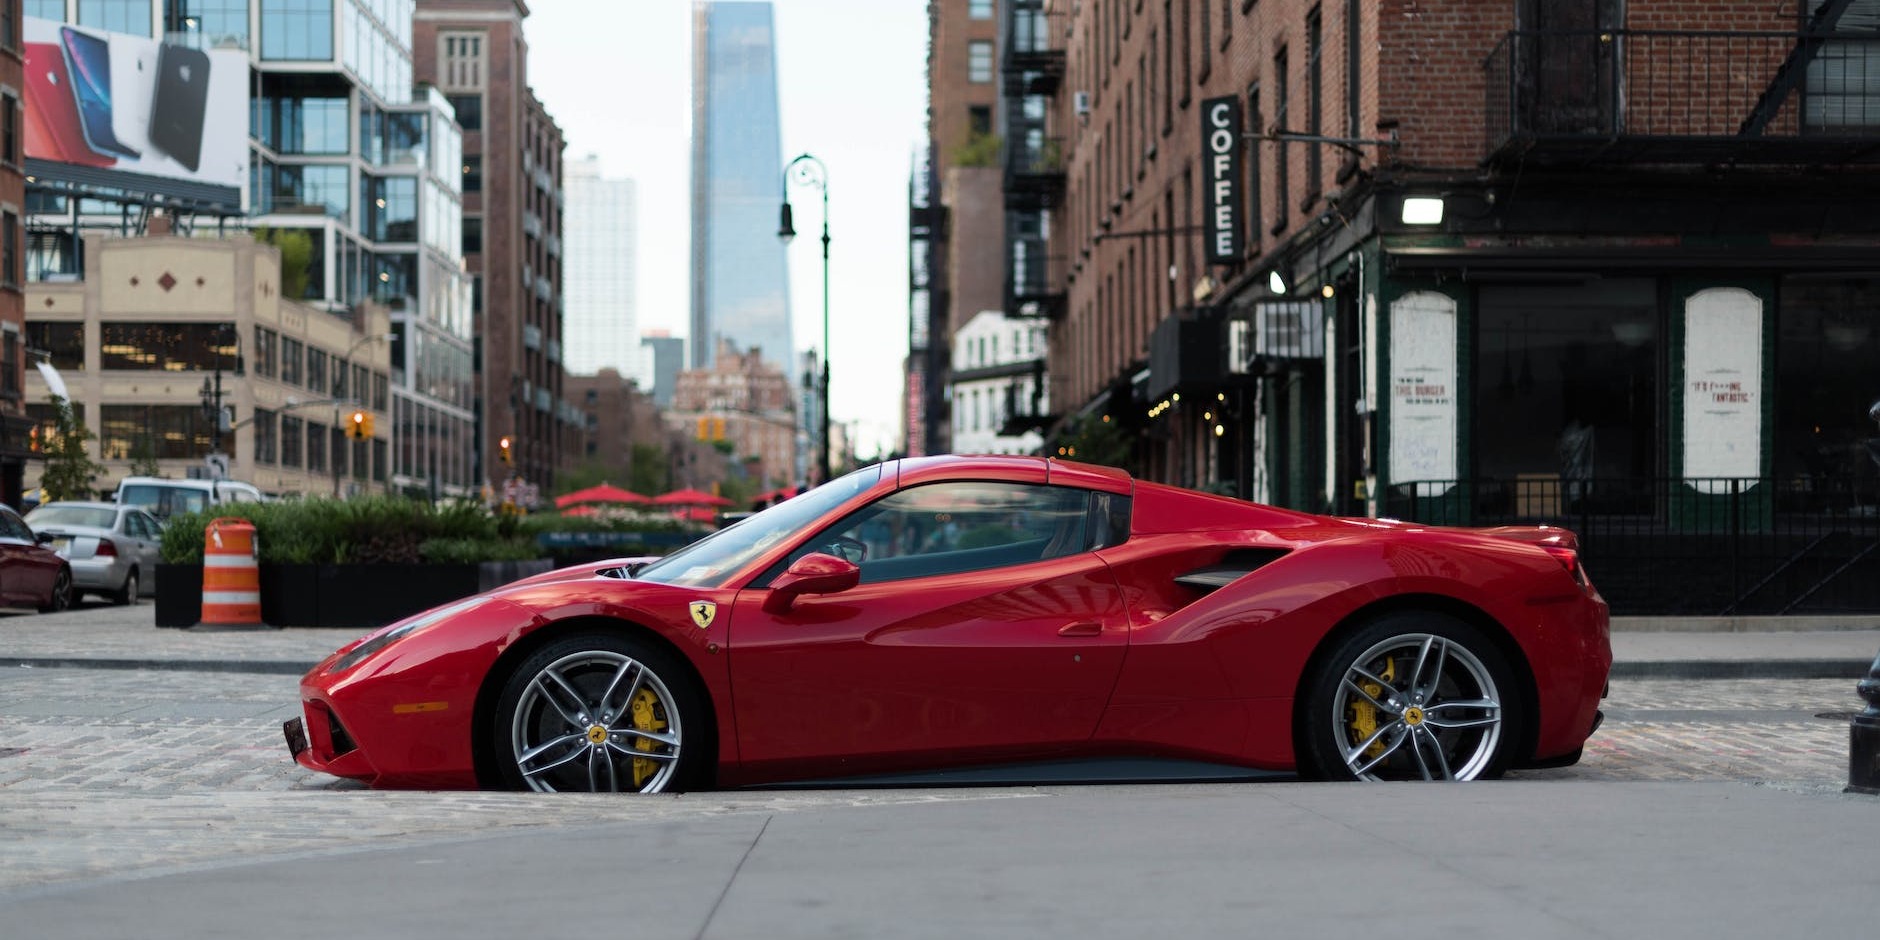 Discover the Cost of Hiring a Ferrari for a Day in the UK